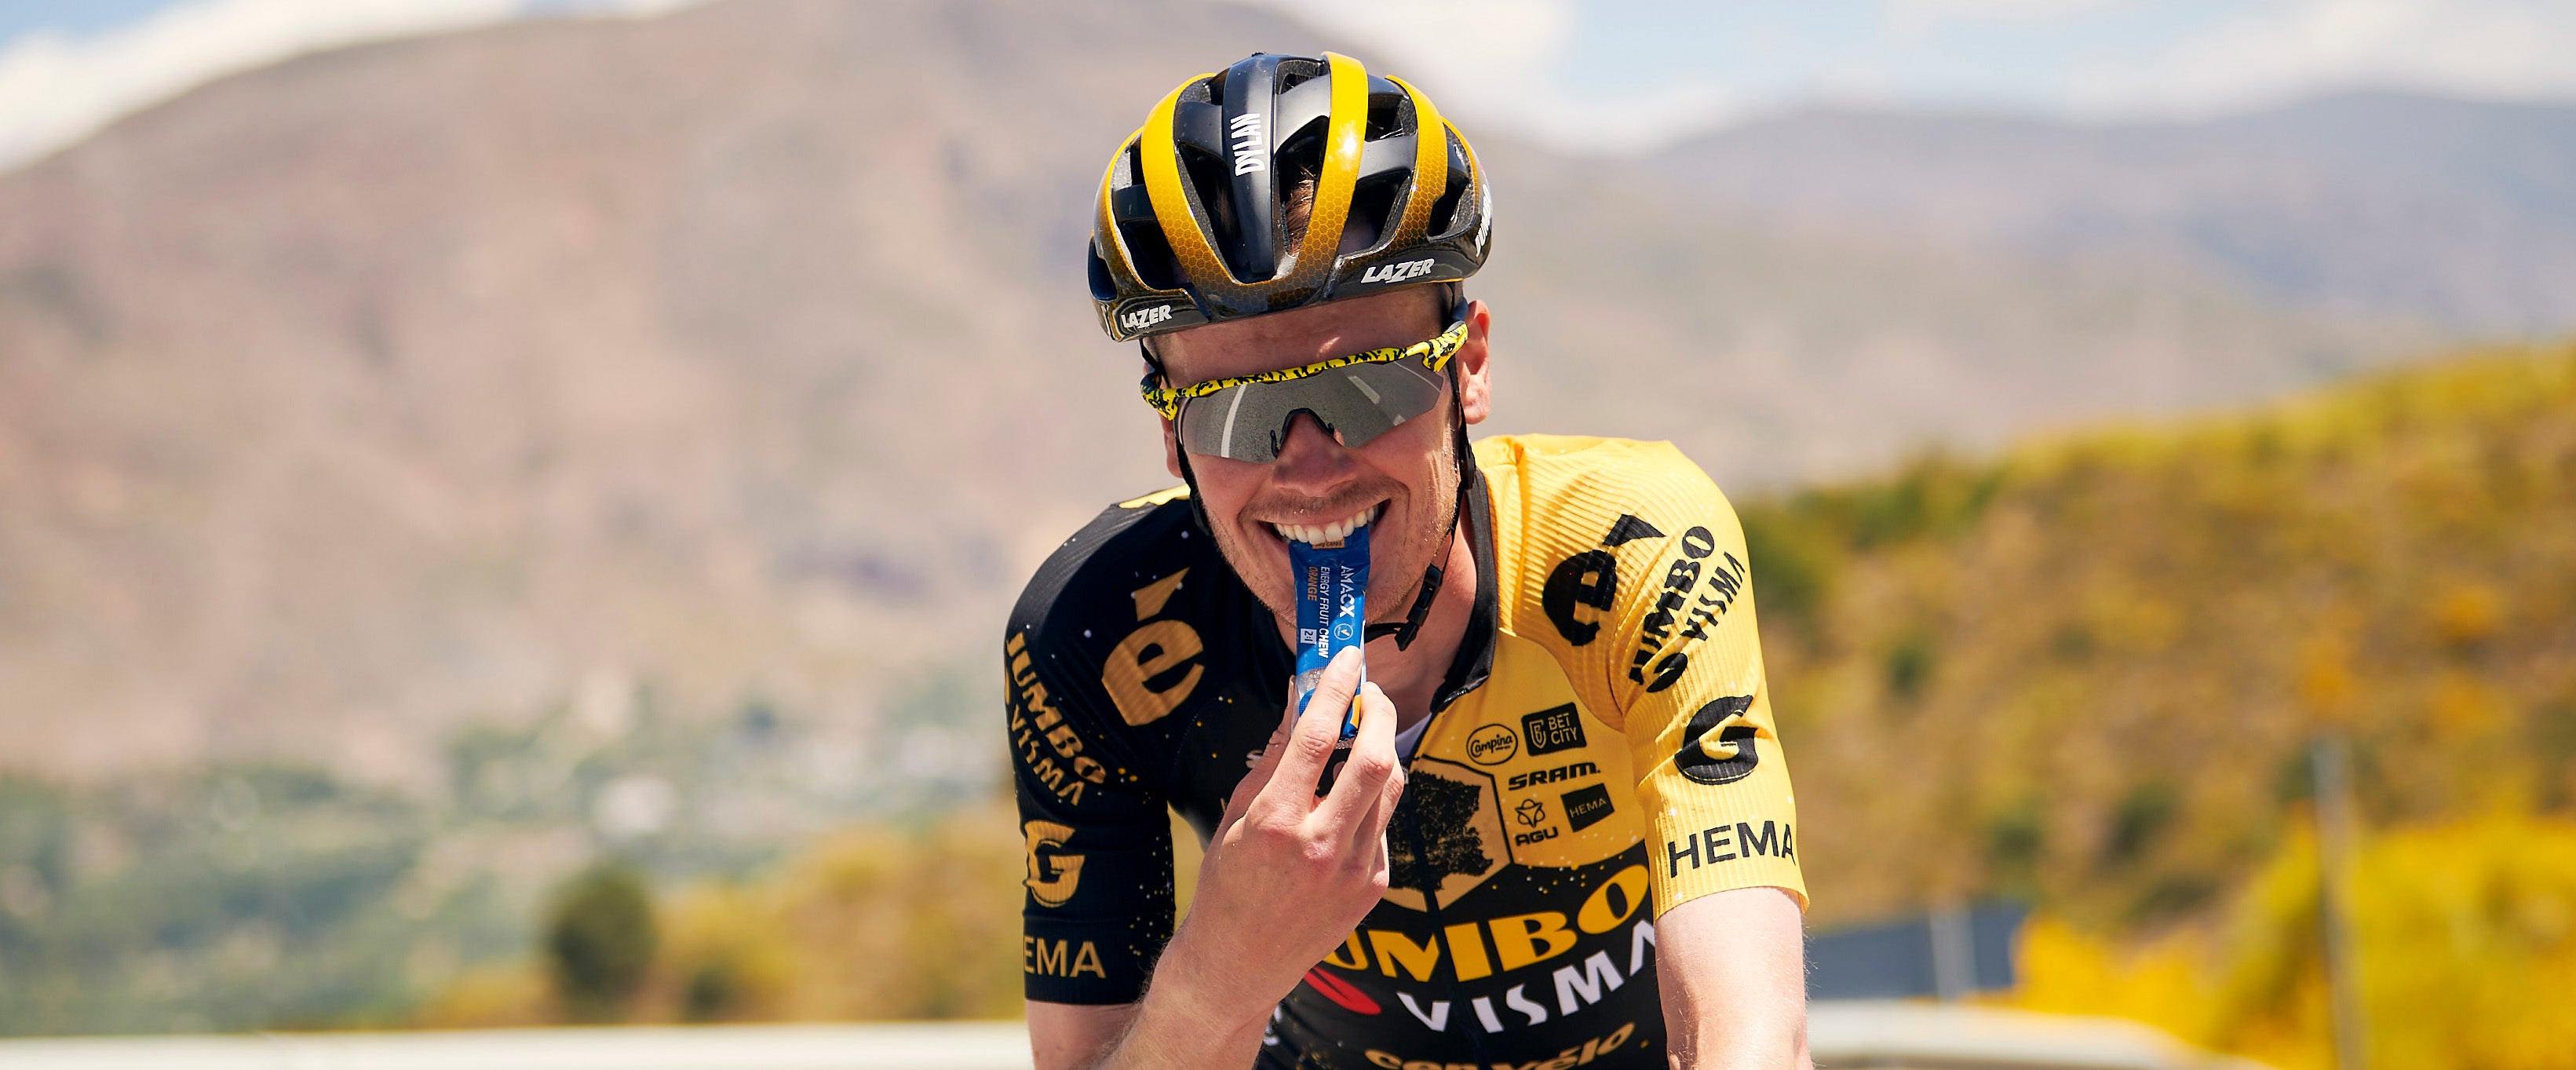 Nutrition for Jumbo Visma in the Tour